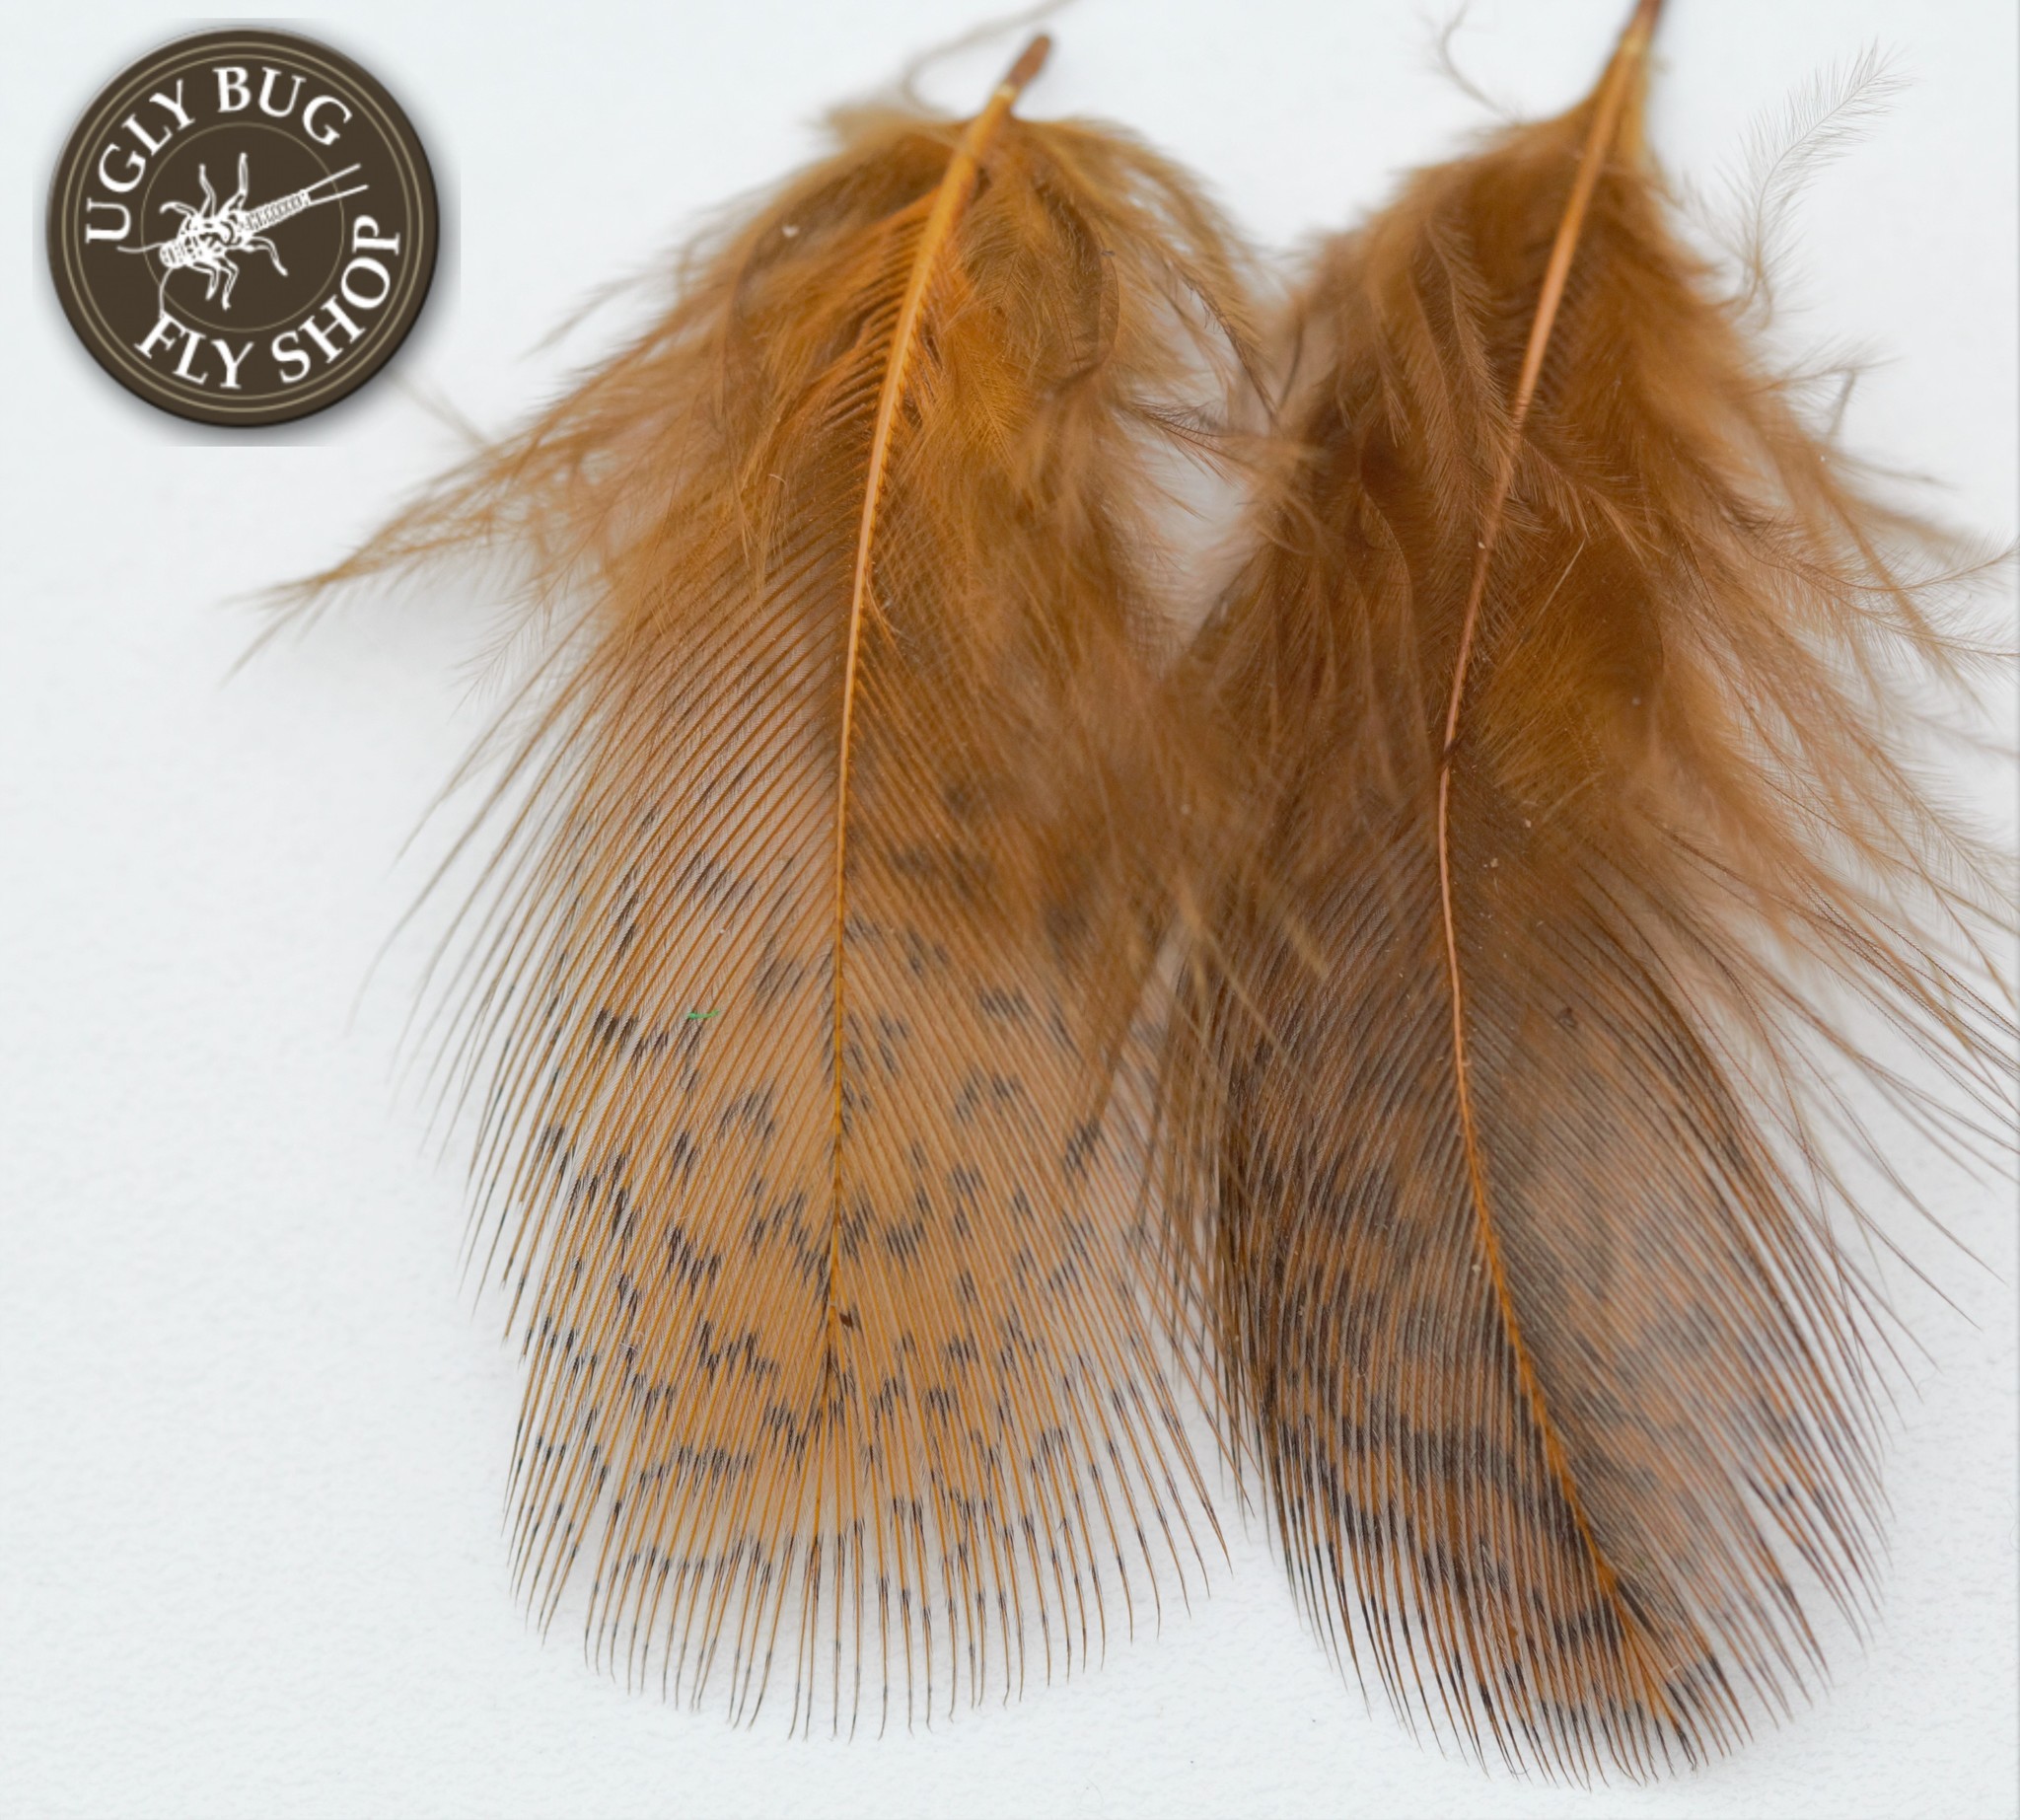 HARELINE DYED HUNGARIAN PARTRIDGE FEATHERS